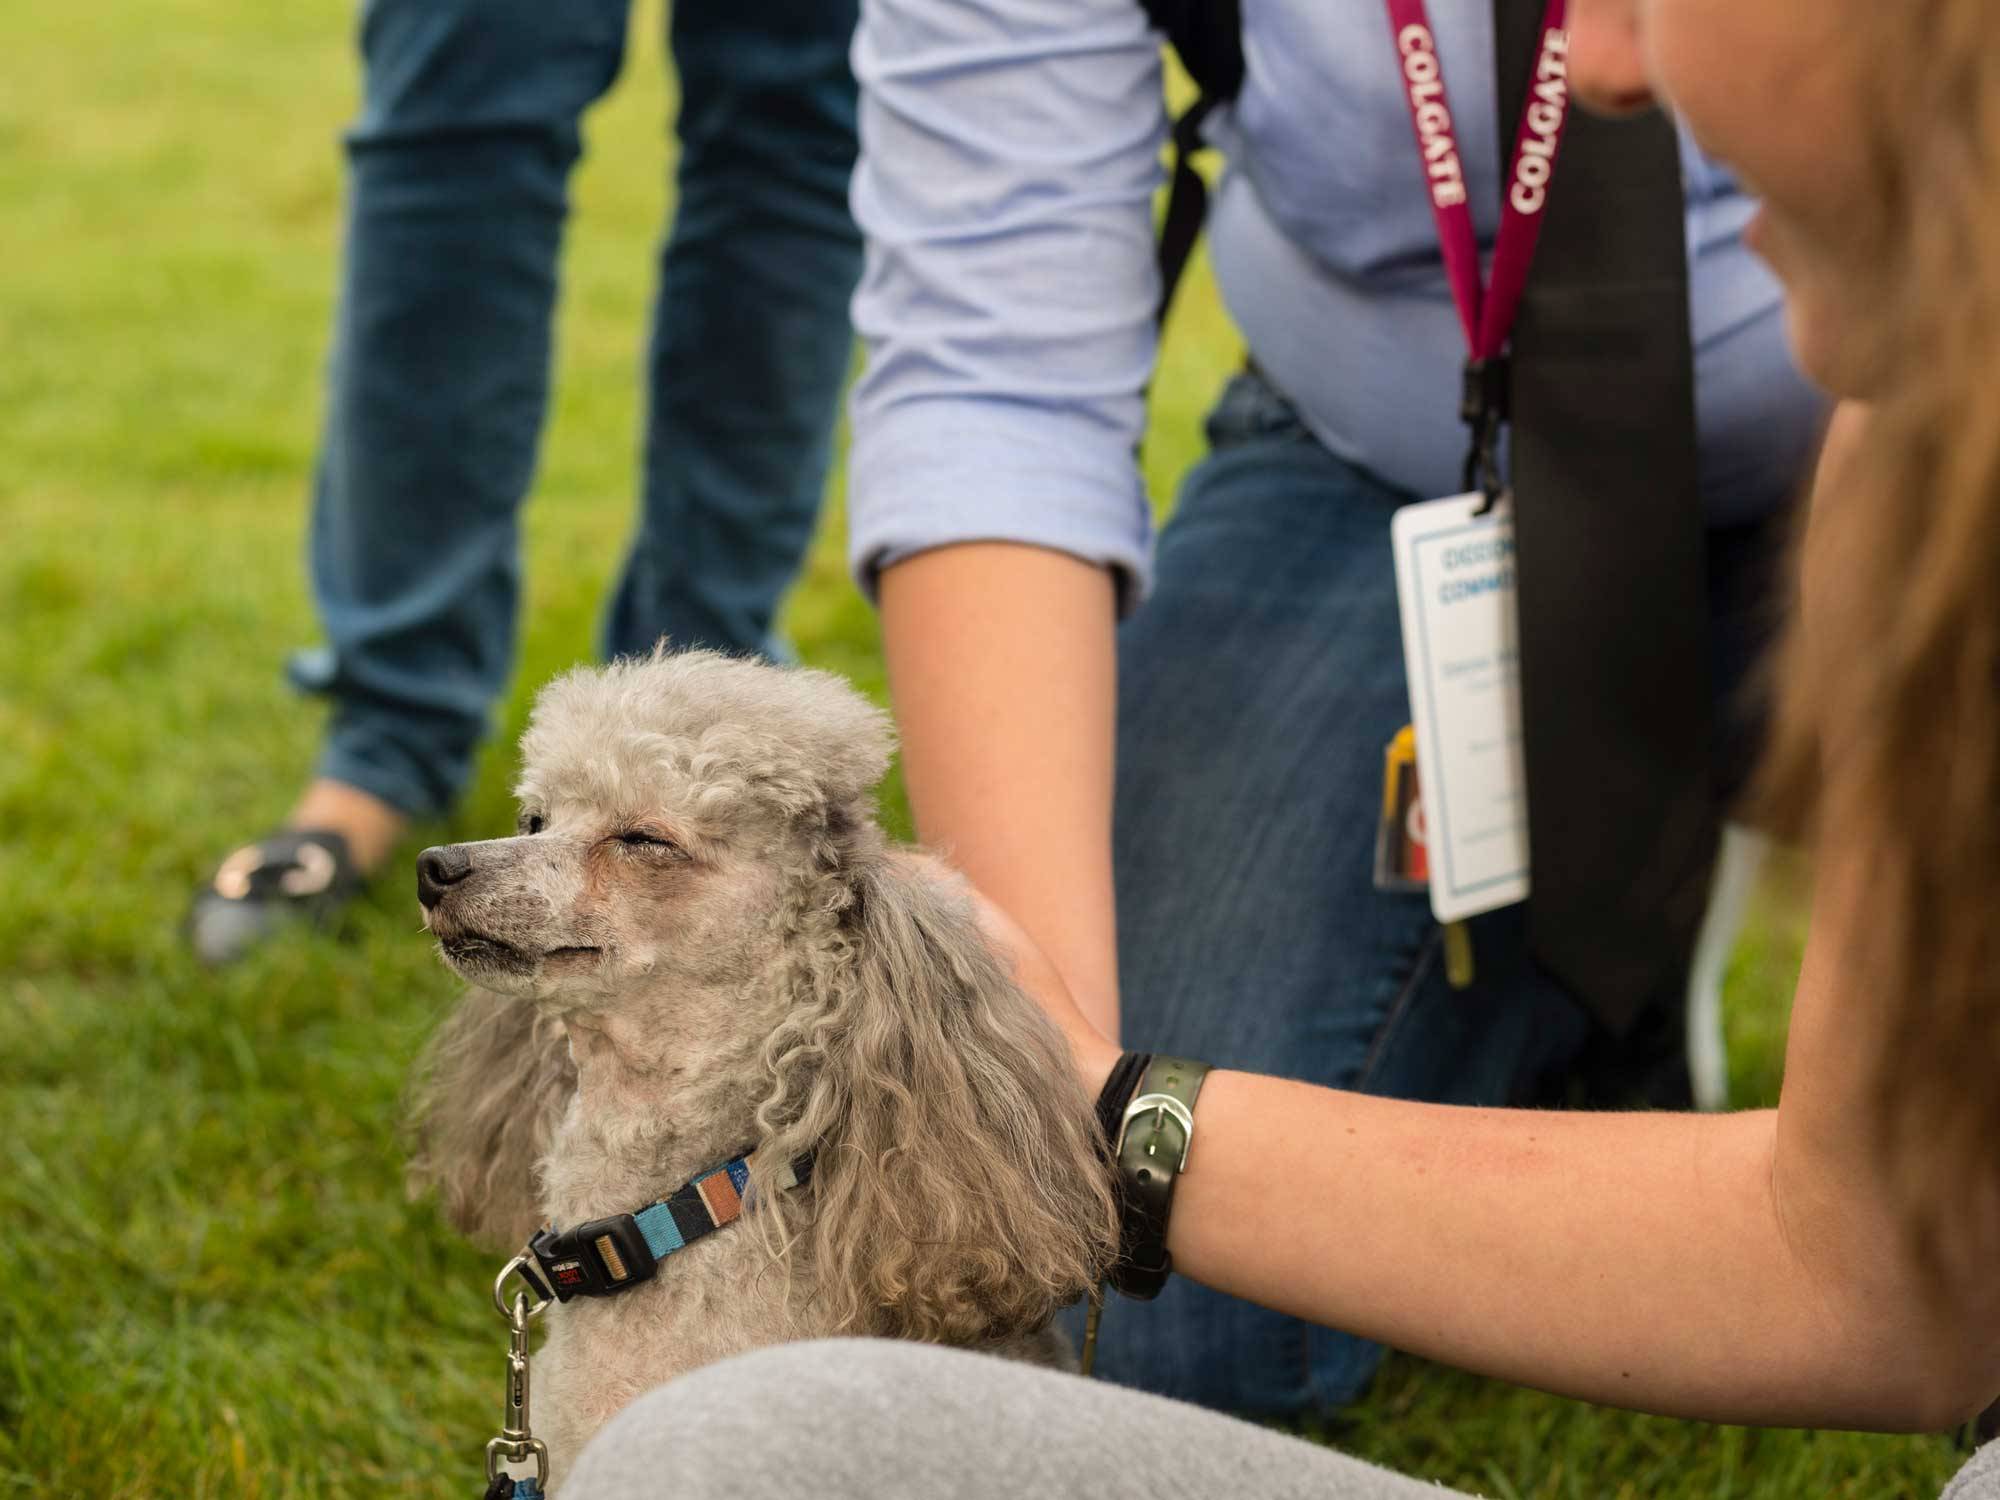 A meet and greet of dogs in the academic quad